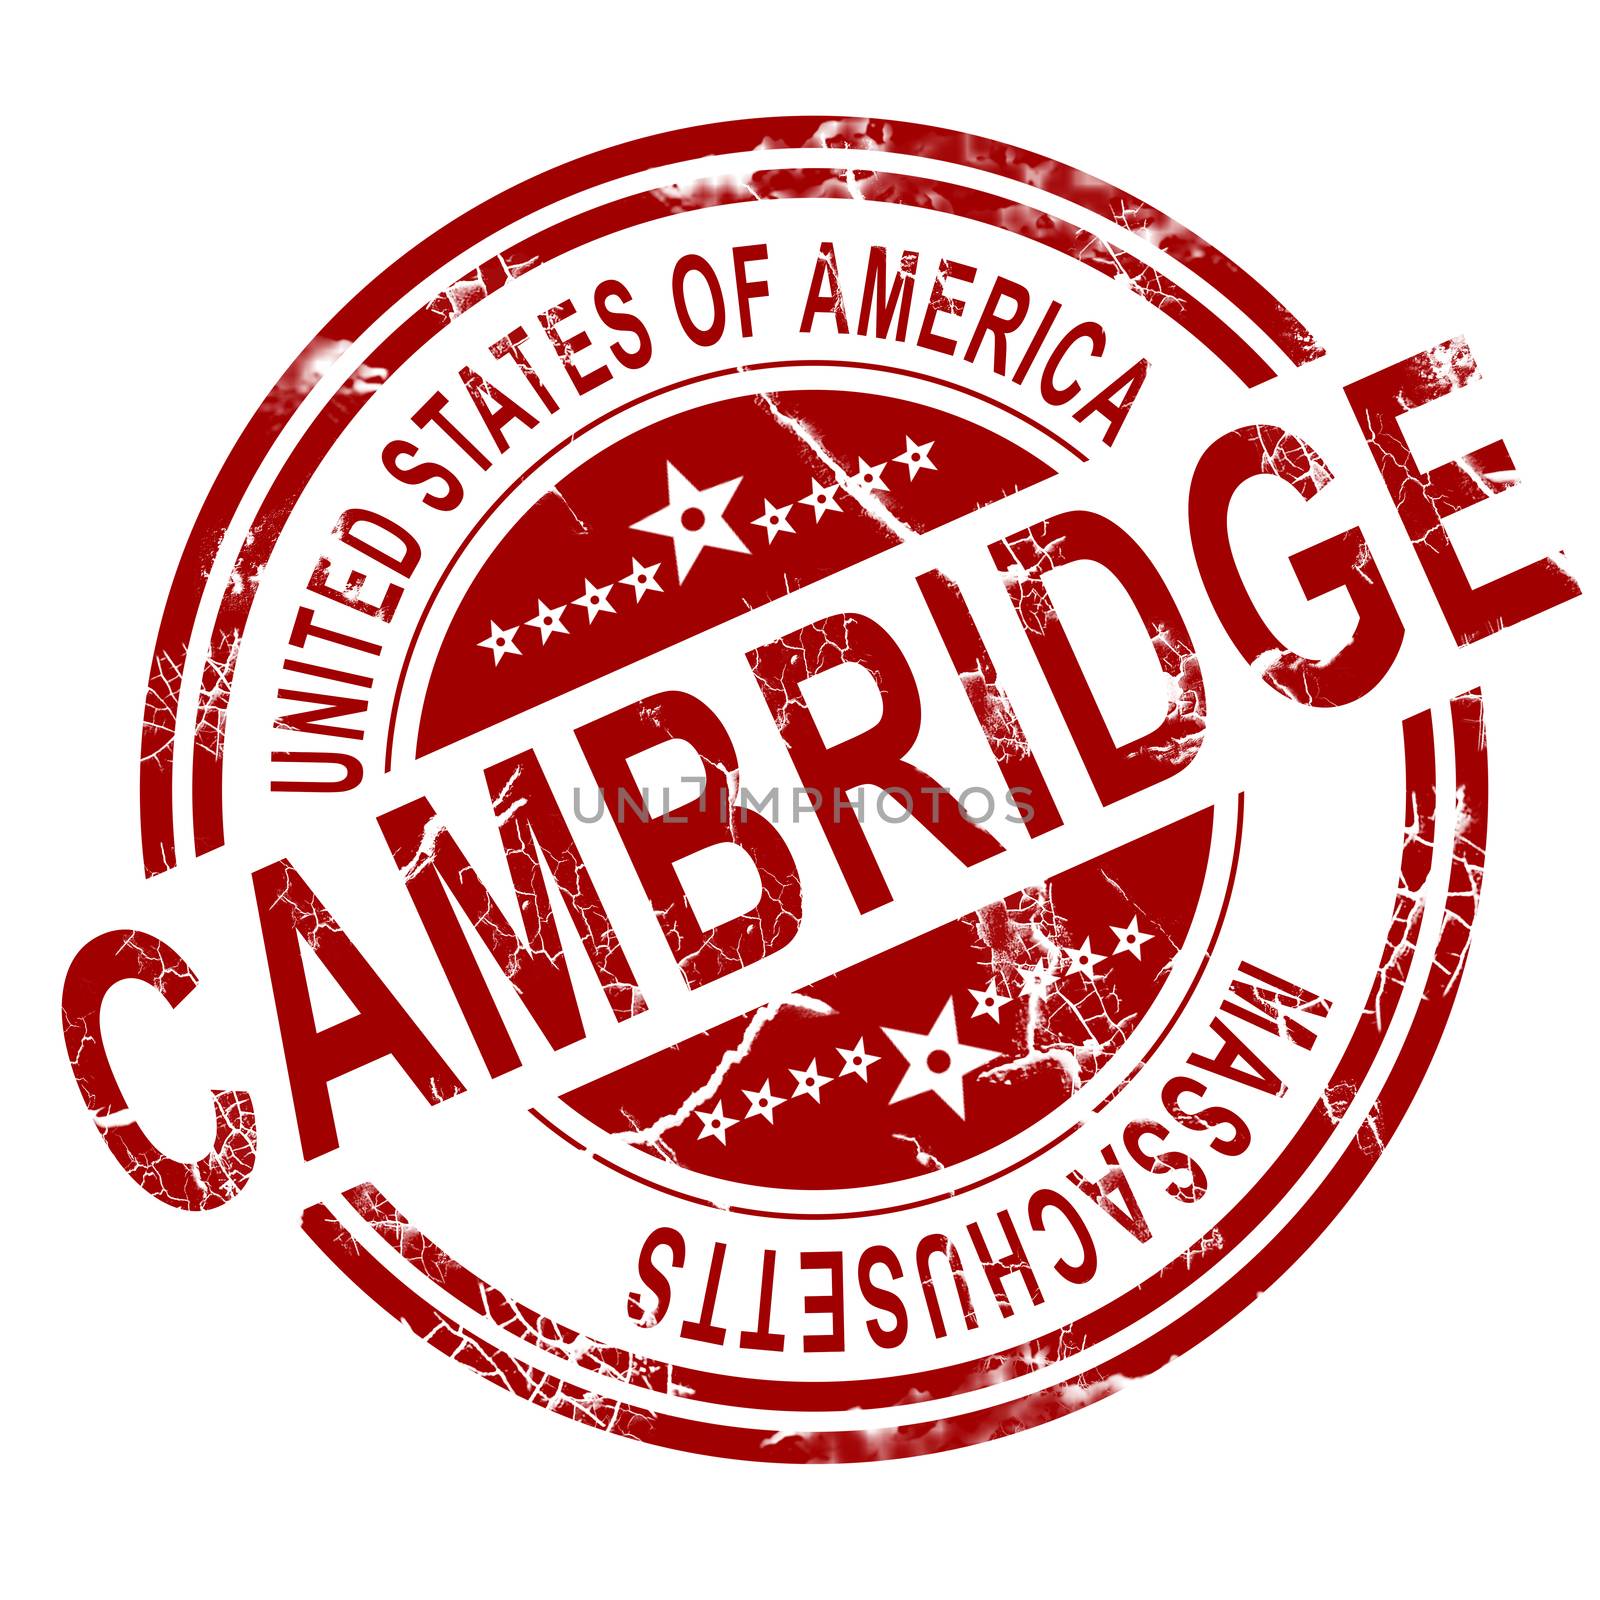 Red Cambridge with white background, 3D rendering